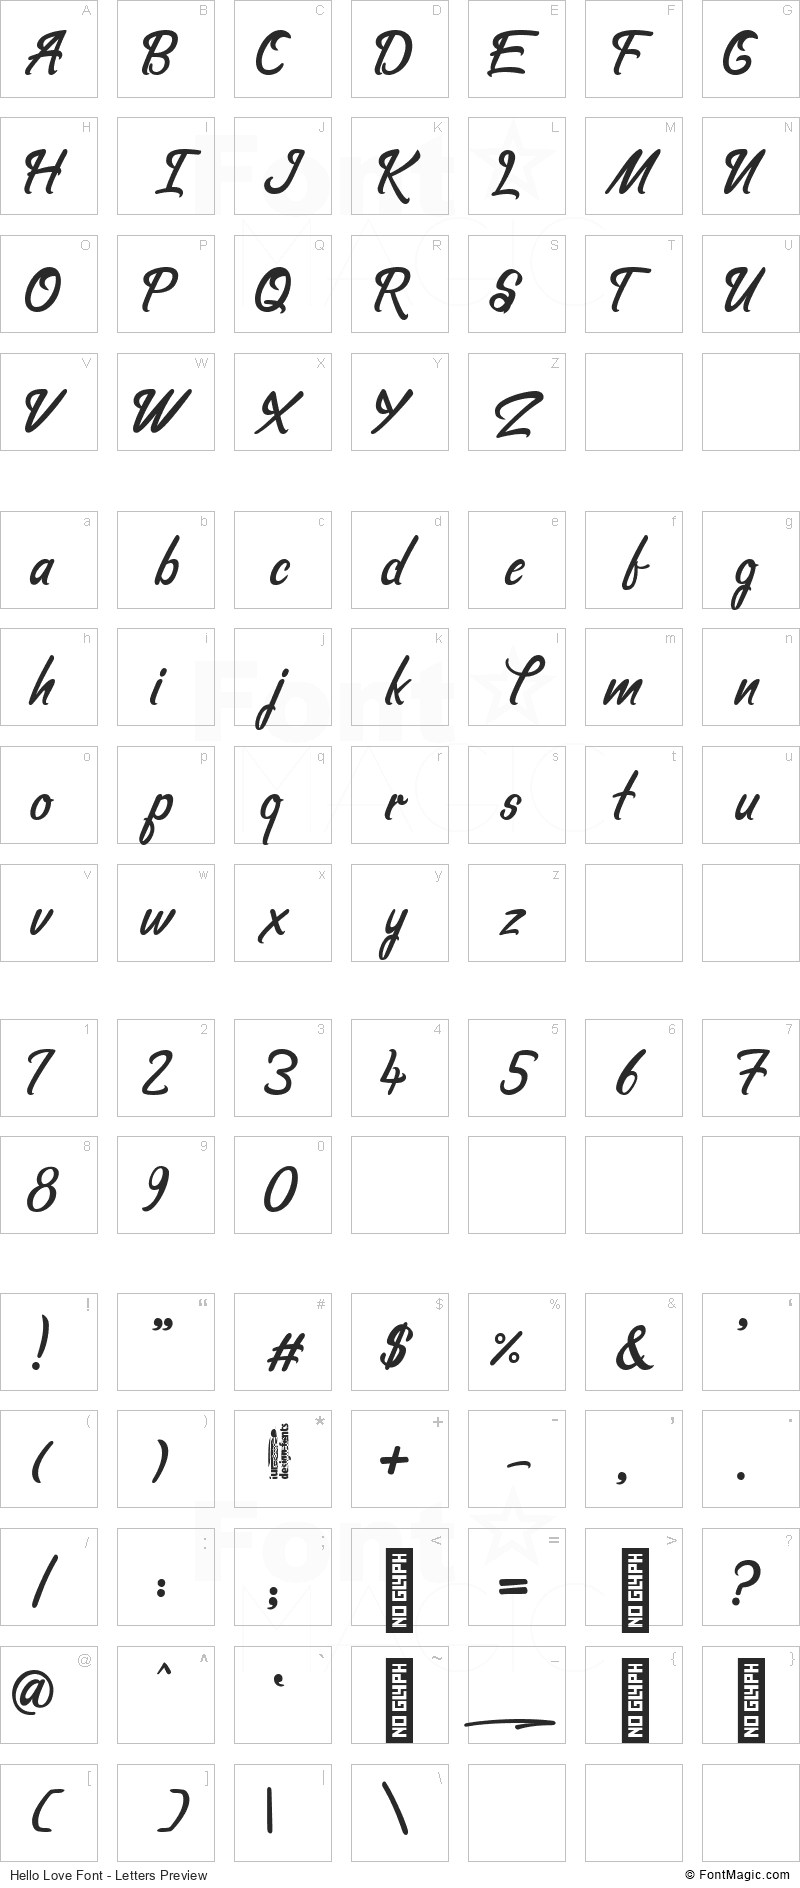 Hello Love Font - All Latters Preview Chart